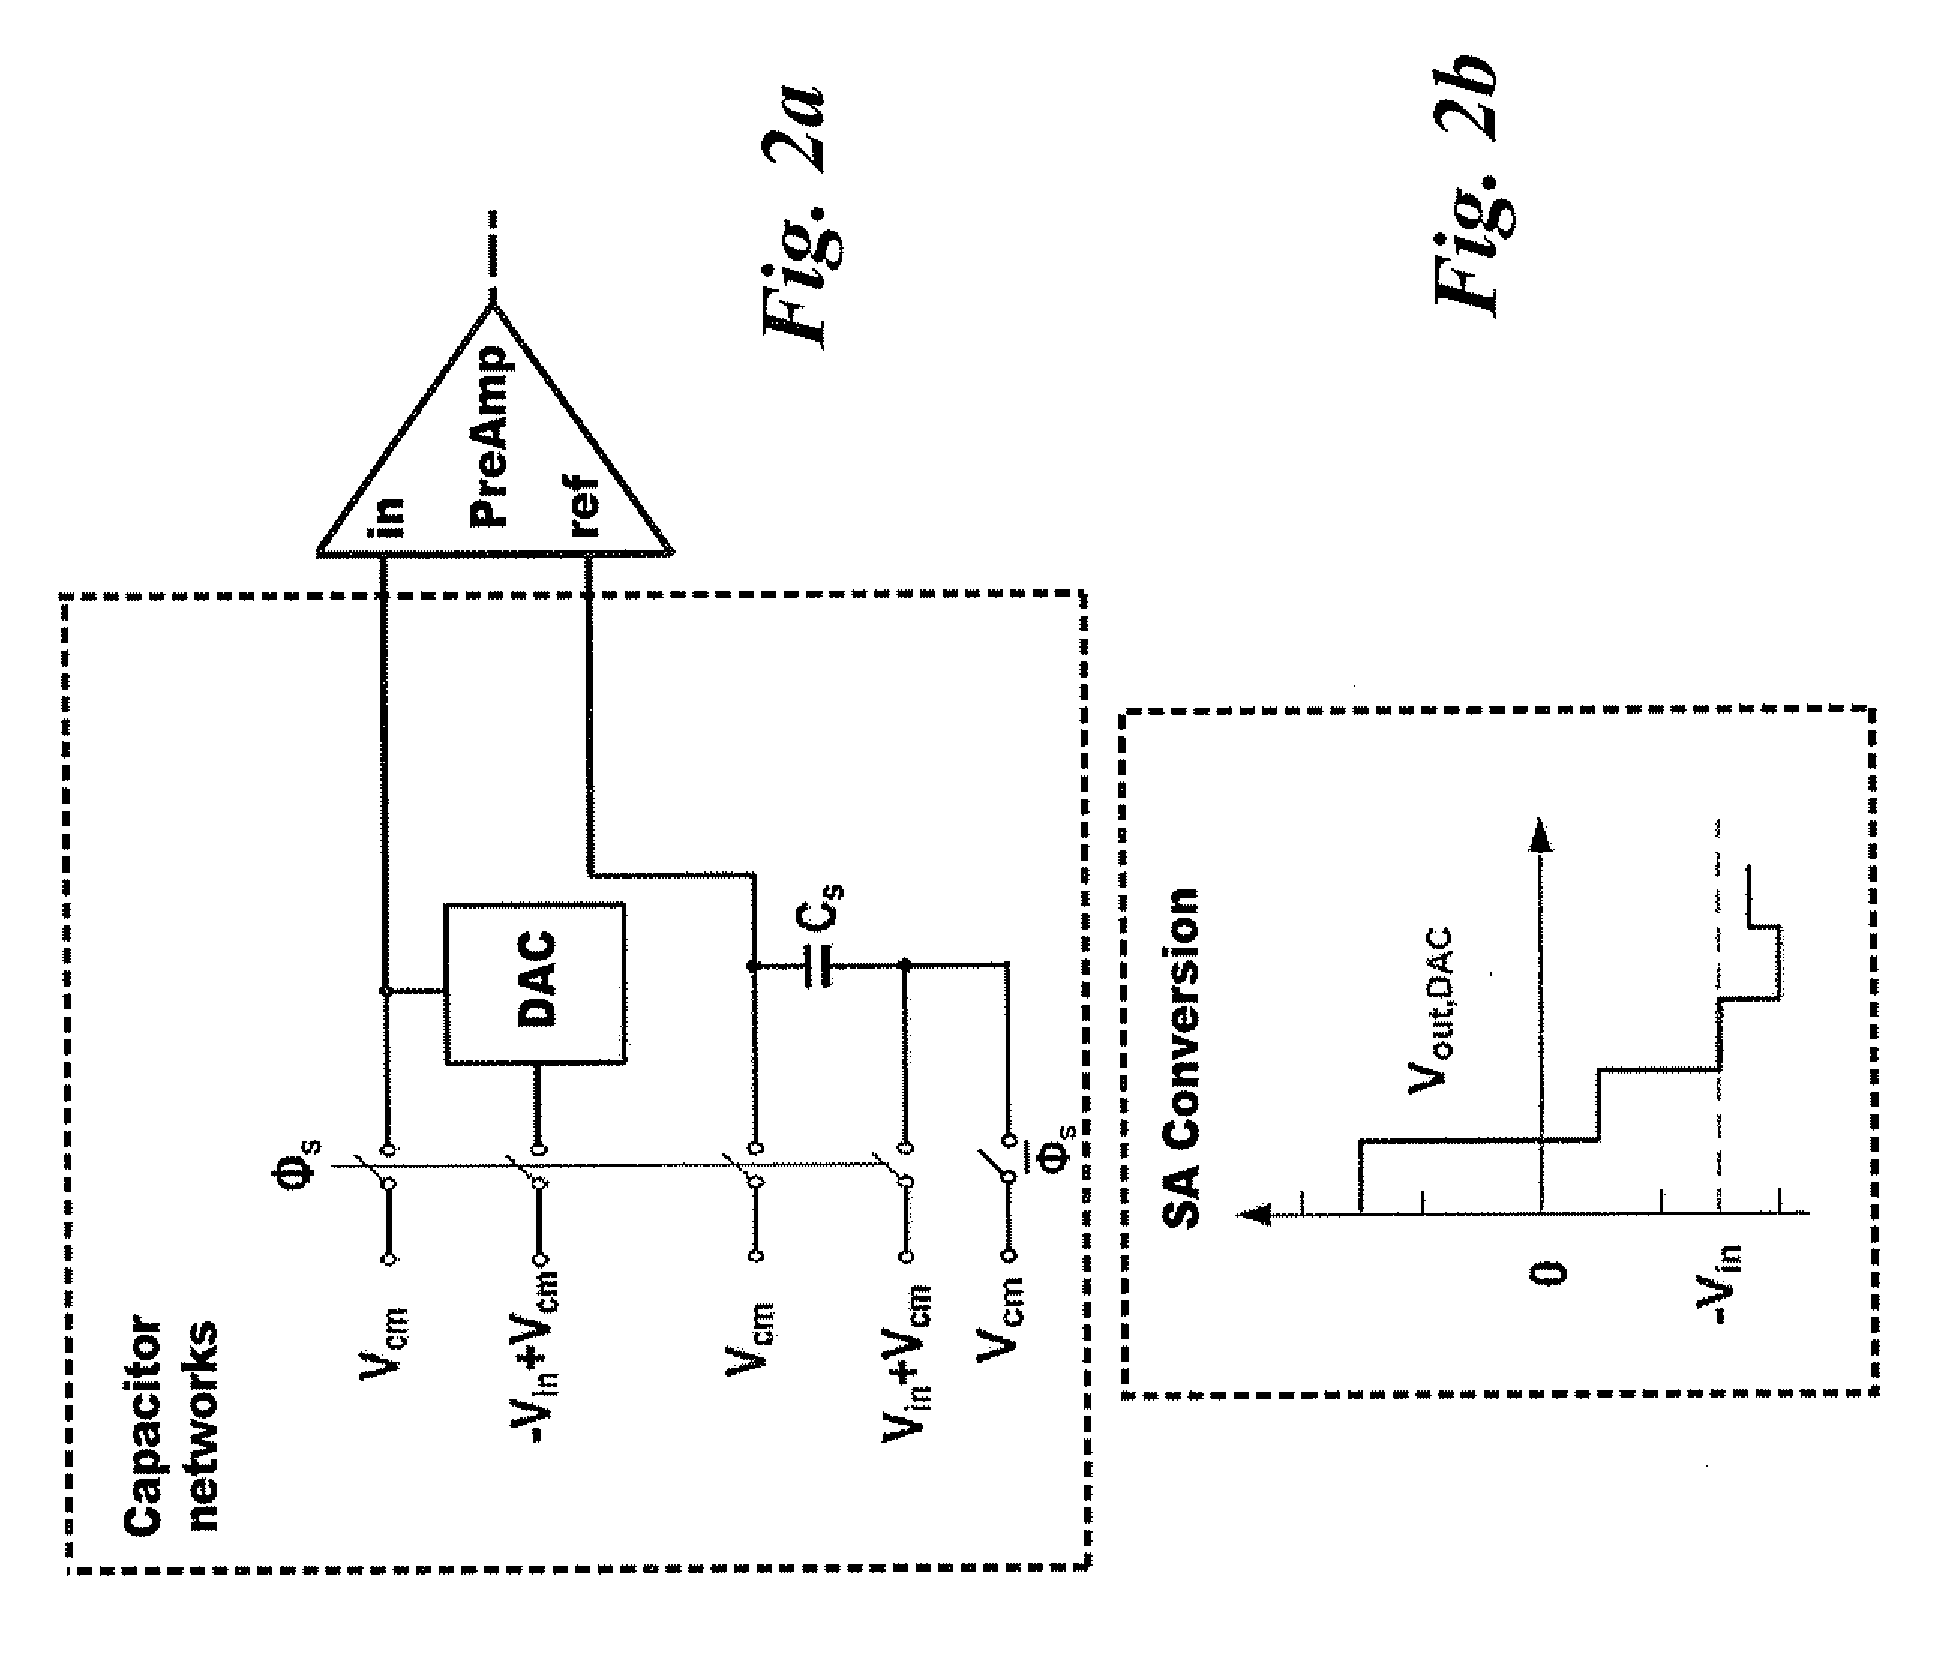 N-bits successive approximation register analog-to-digital converting circuit